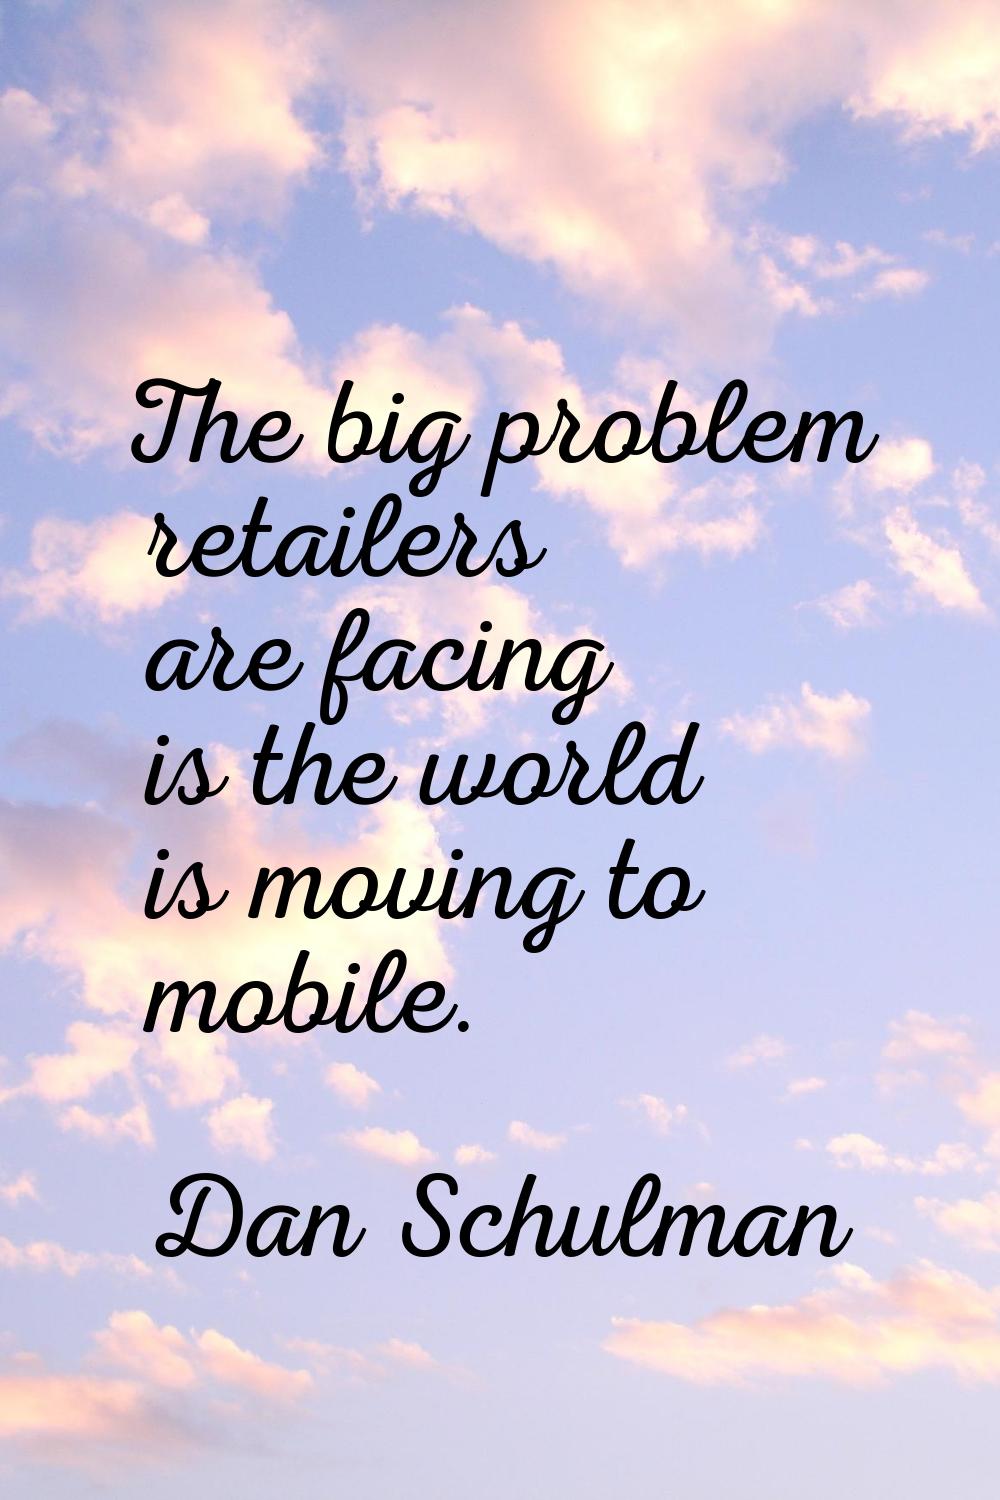 The big problem retailers are facing is the world is moving to mobile.